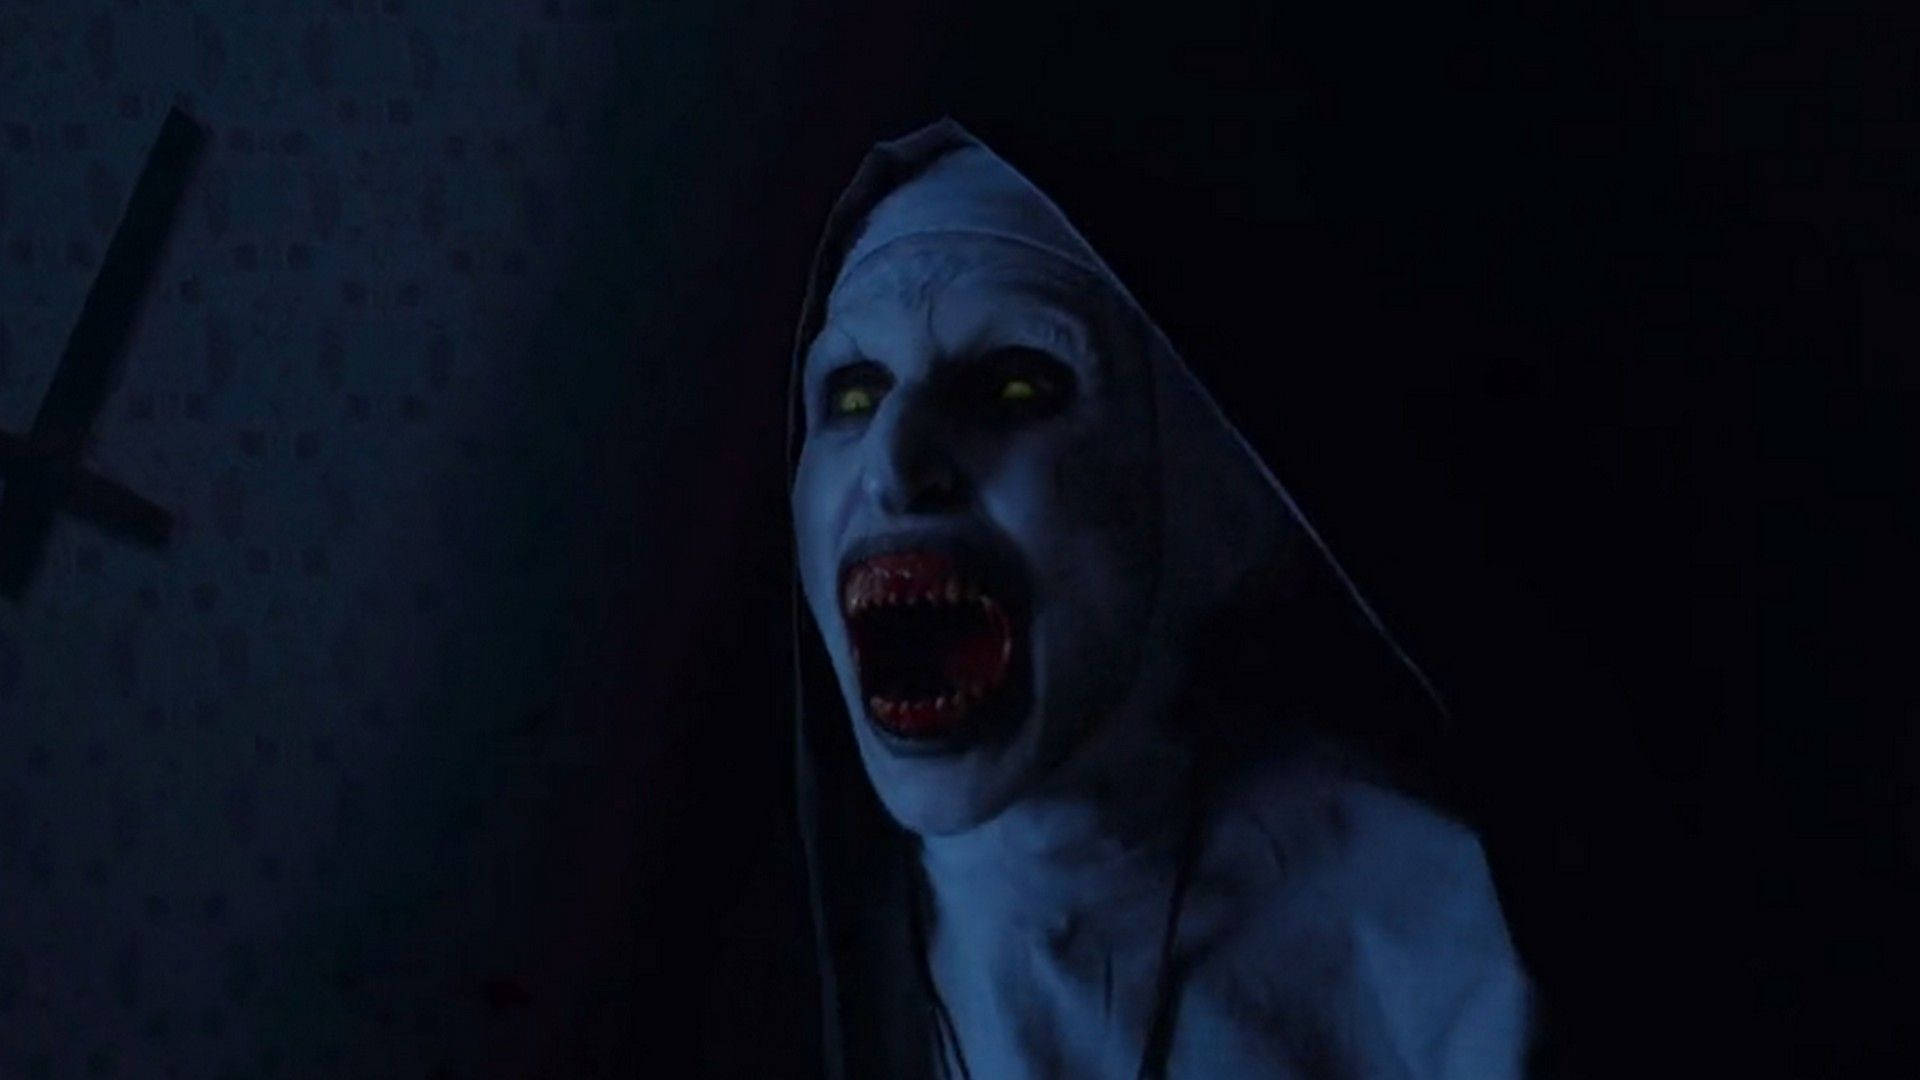 The Conjuring Screaming Valak Wallpaper